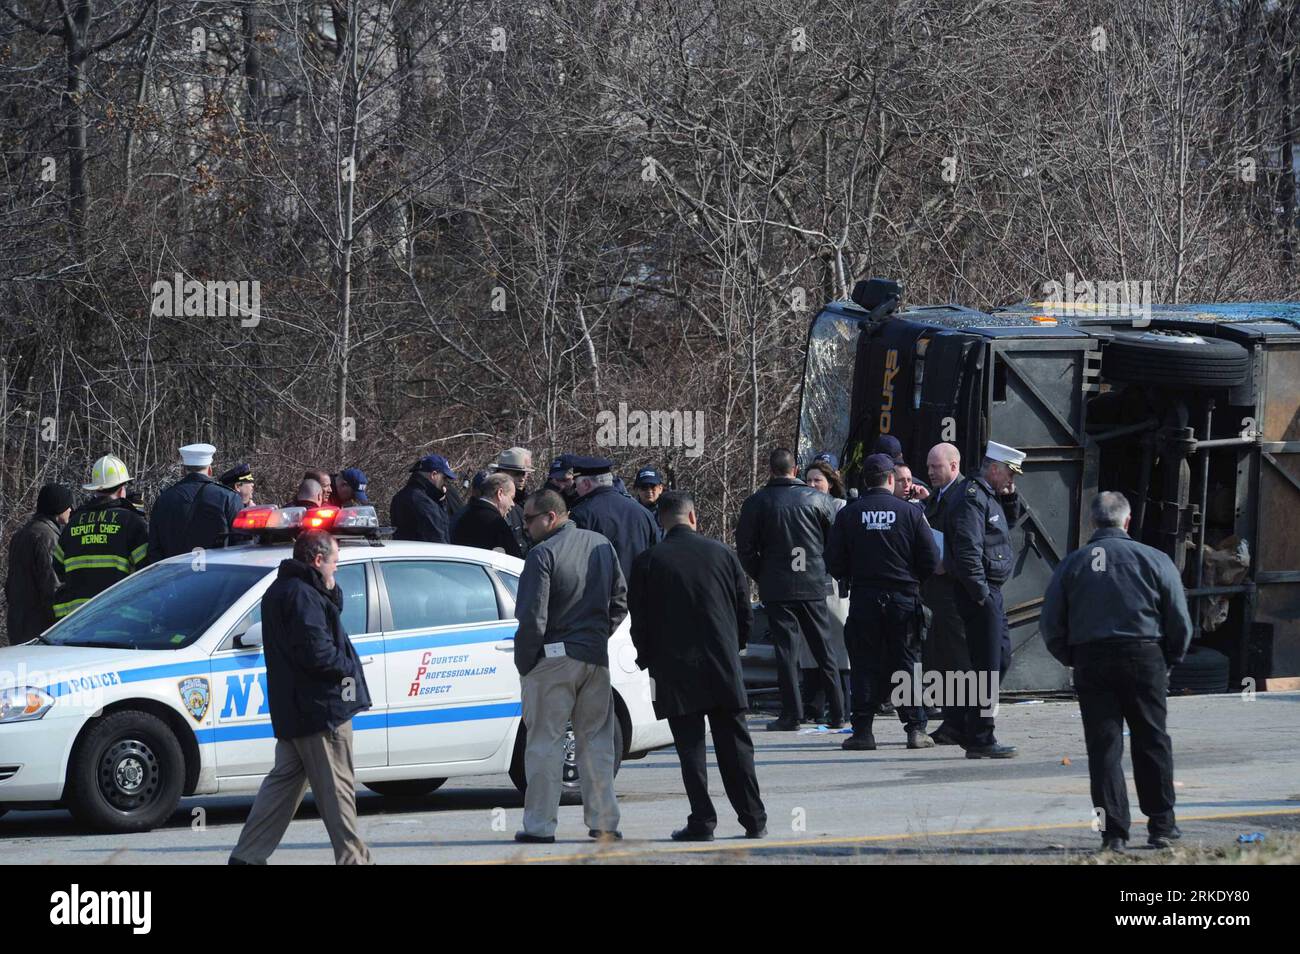 Bildnummer: 55016889  Datum: 12.03.2011  Copyright: imago/Xinhua (110312) -- NEW YORK, March 12, 2011 (Xinhua) -- gather at the site where a tour bus overturned on the New England Thruway in the Bronx near the Westchester County line, the United States, on March 12, 2011. Thirteen were killed and six others seriously injured when a tour bus overturned on a highway in the U.S. state of New York on Saturday. (Xinhua/Shen Hong) (lr) U.S.-NEW YORK-BUS ACCIDENT PUBLICATIONxNOTxINxCHN Gesellschaft Busunglück Busunfall Verkehrsunfall kbdig xsp 2011 quer  o0 Bus, Unfall, Unglück, Totale    Bildnummer Stock Photo